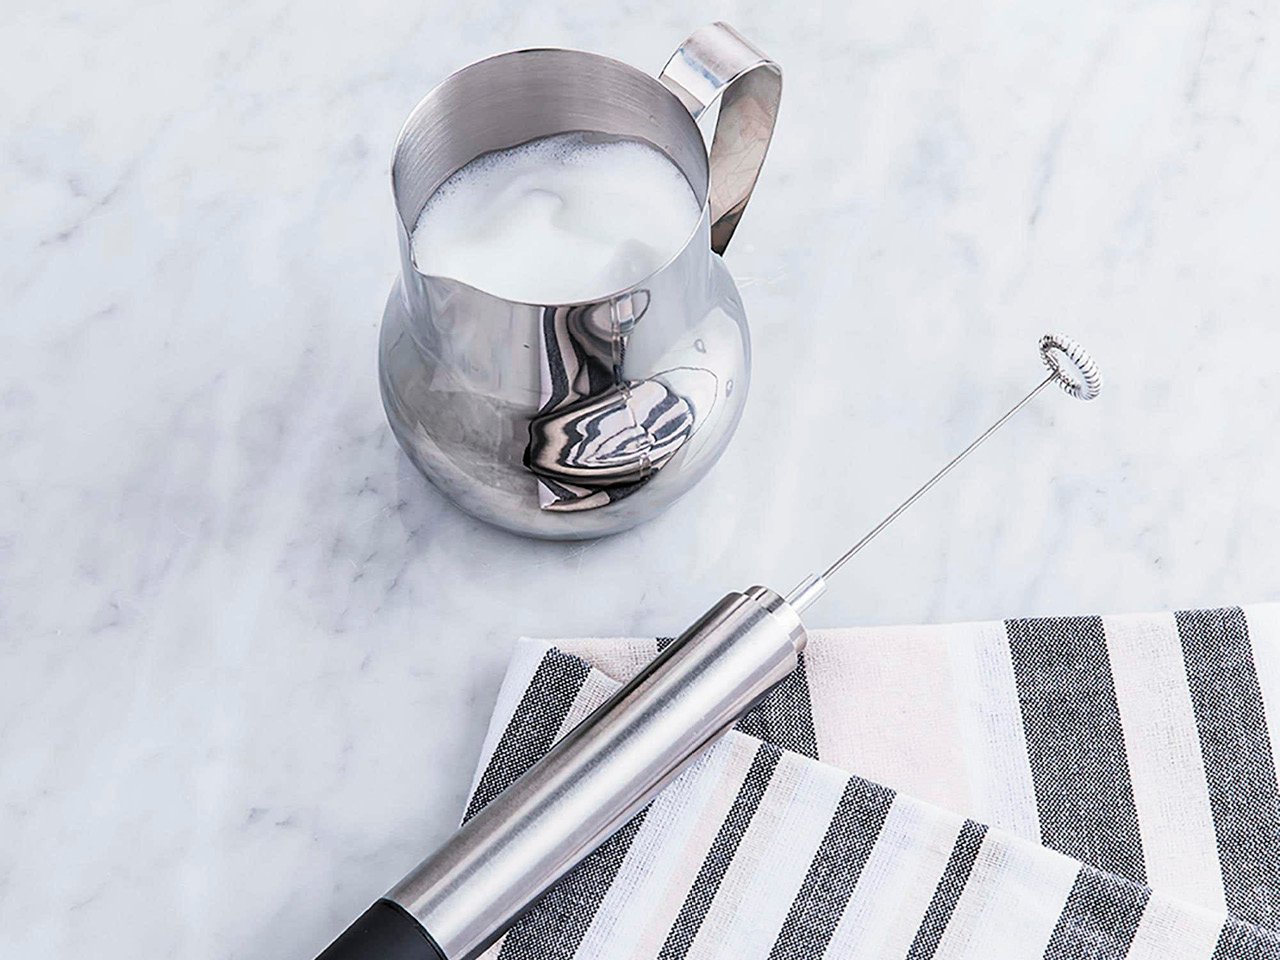 A Kitchen Stuff Plus milk frother shown on a marble countertop with a jar of milk and striped grey linen cloth.